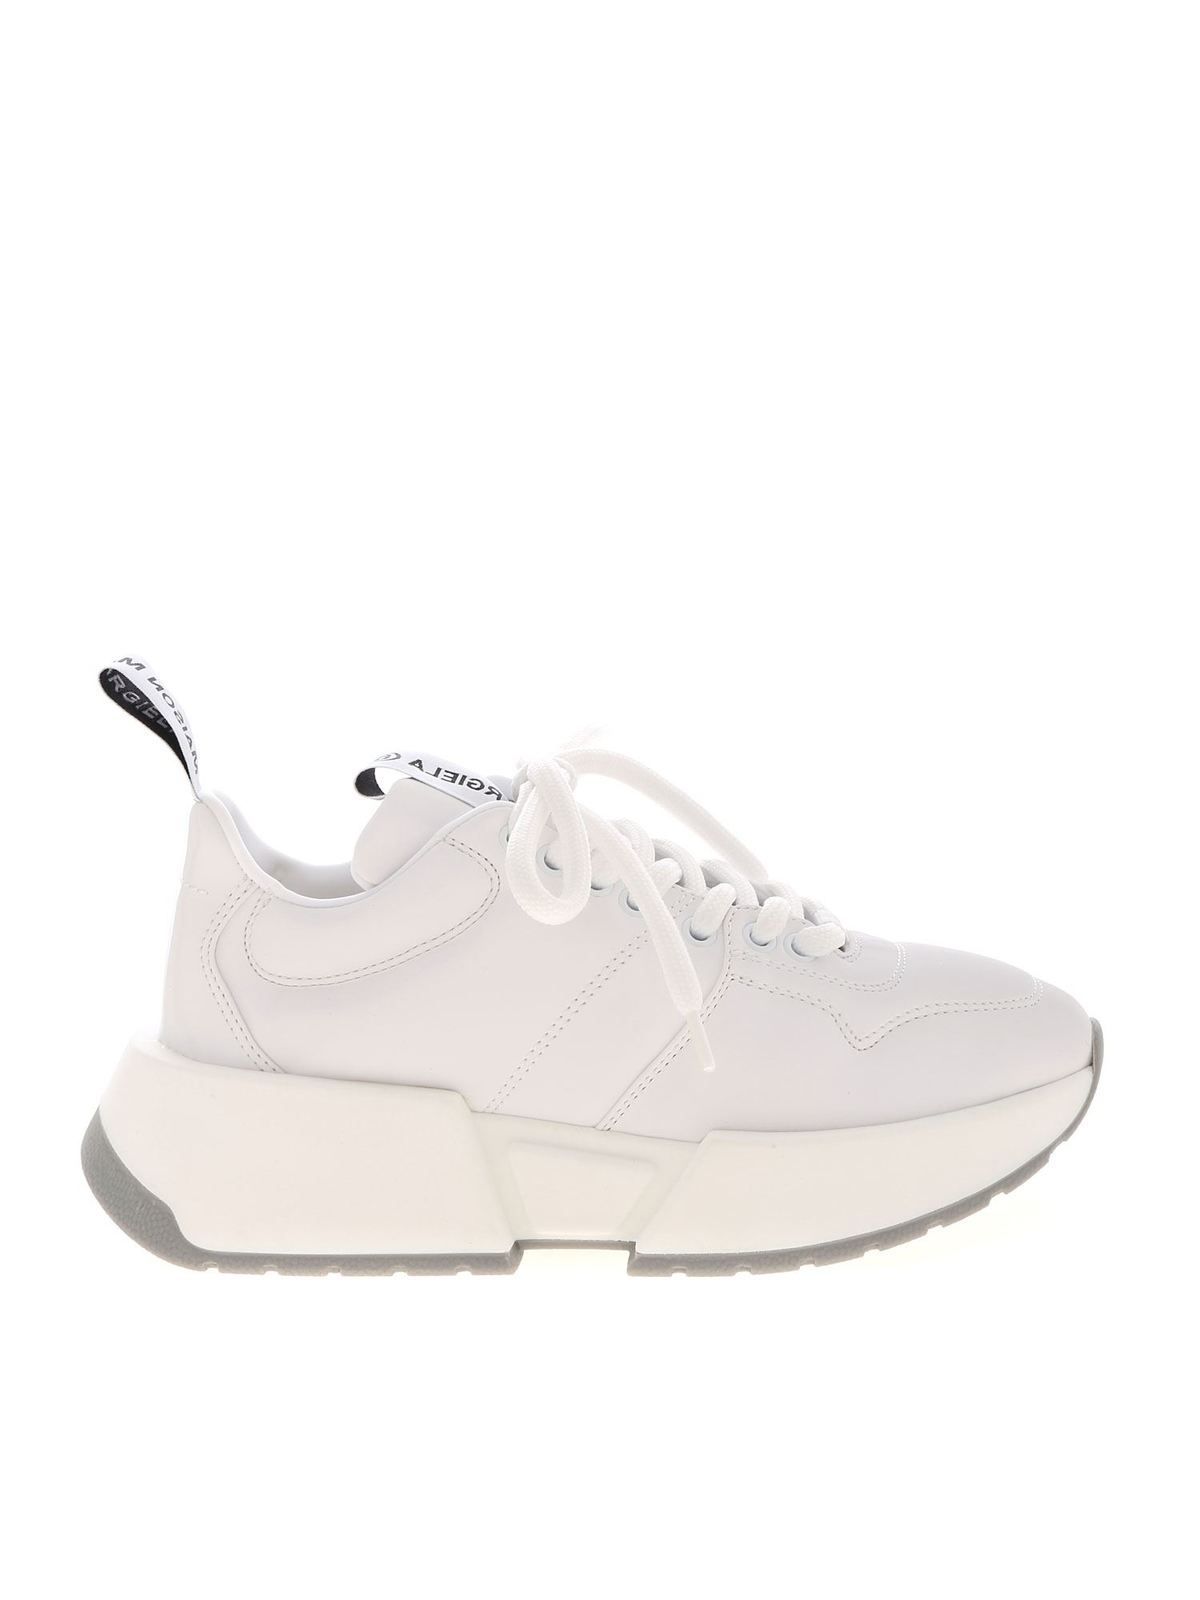 MM6 MAISON MARGIELA BRANDED PULL LOOP trainers IN WHITE